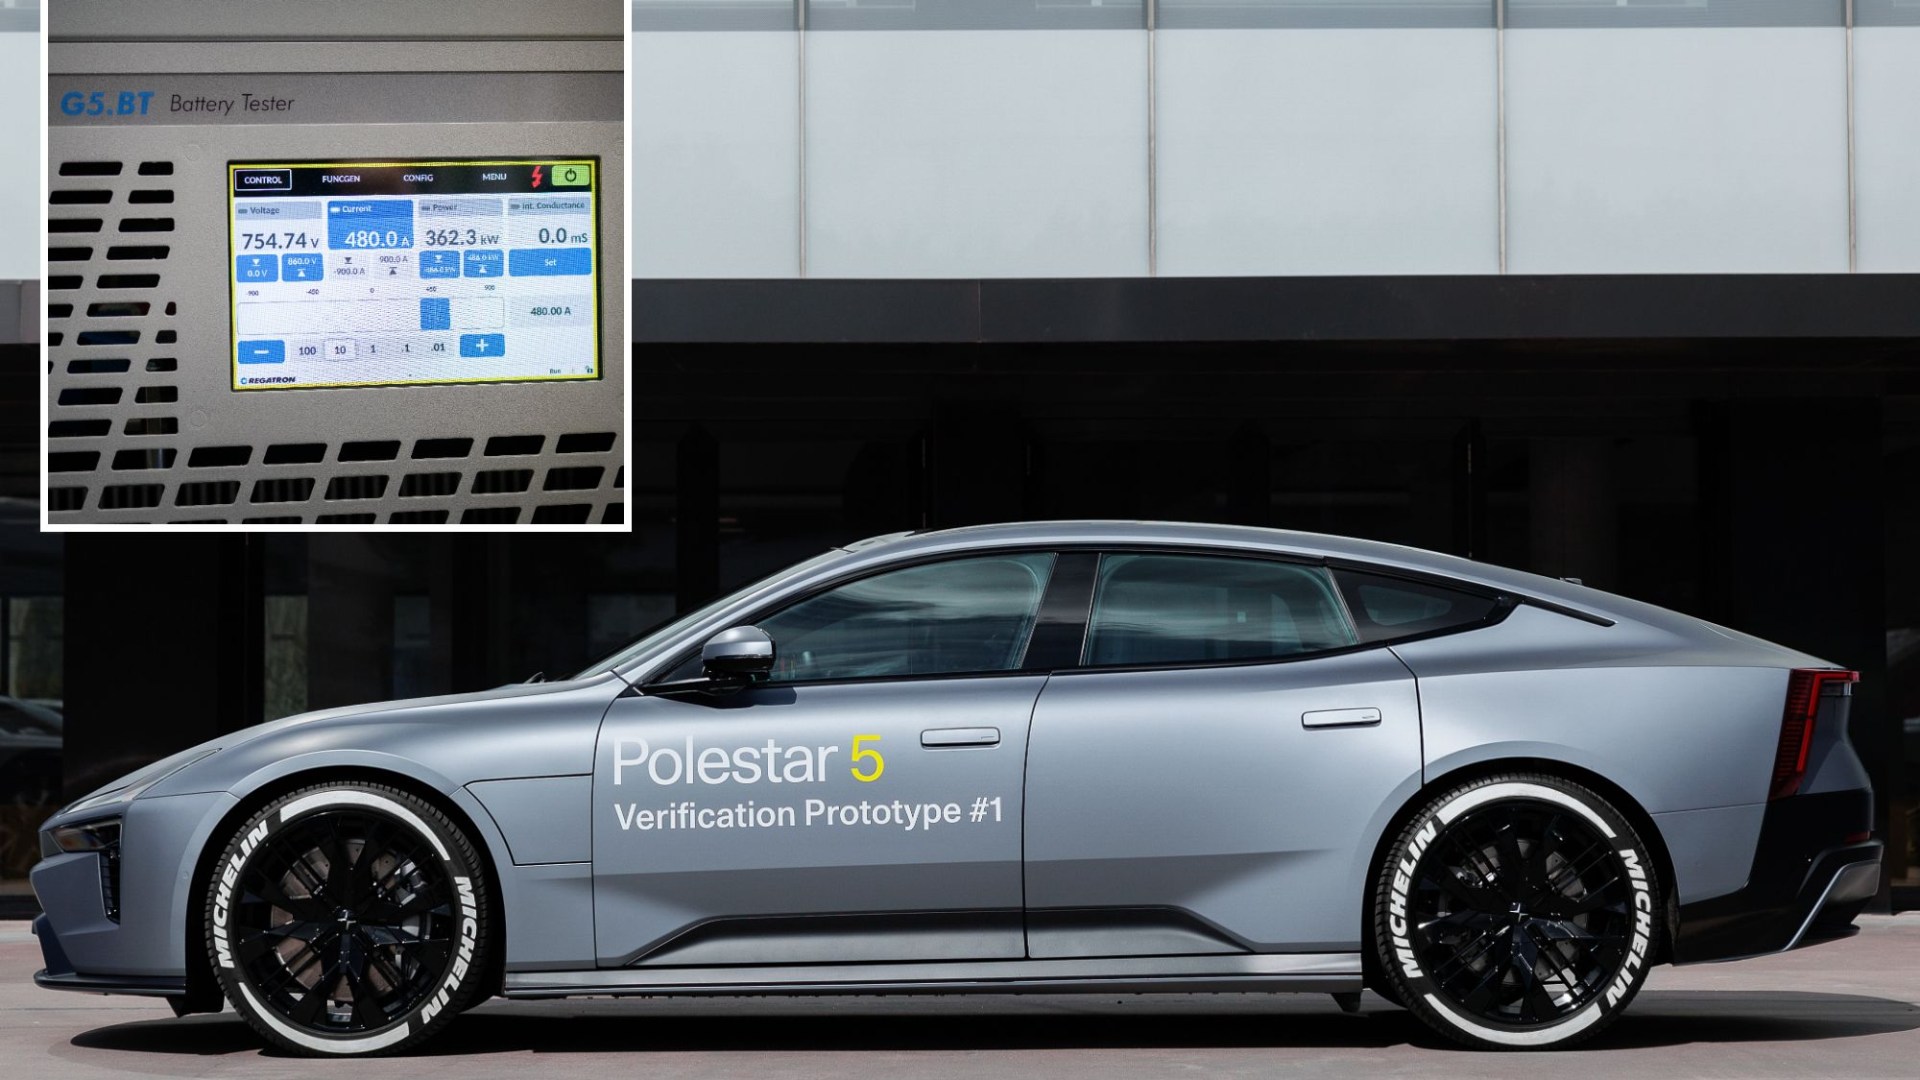 Groundbreaking EV charger can power a car in just 10 MINUTES for hundreds of miles [Video]